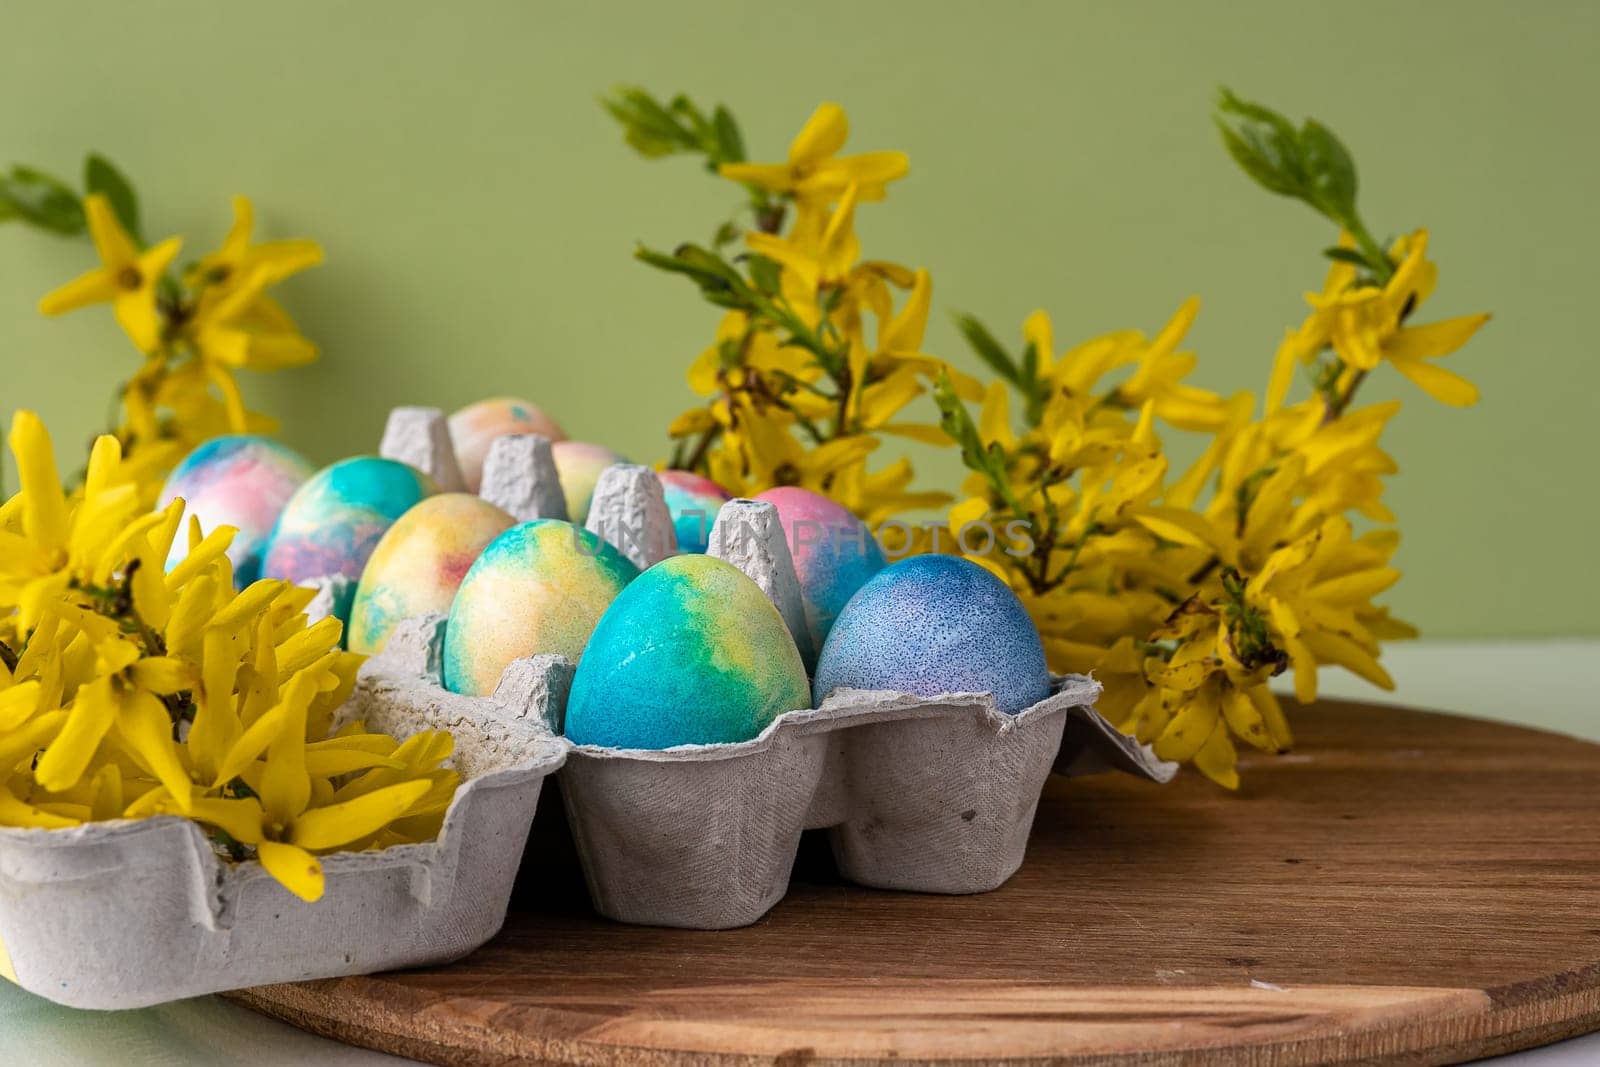 Happy Easter Easter eggs on rustic table with cherry blossoms. Natural dyed colorful eggs in paper tray on wooden board and spring flowers in rustic room. Moody atmospheric image